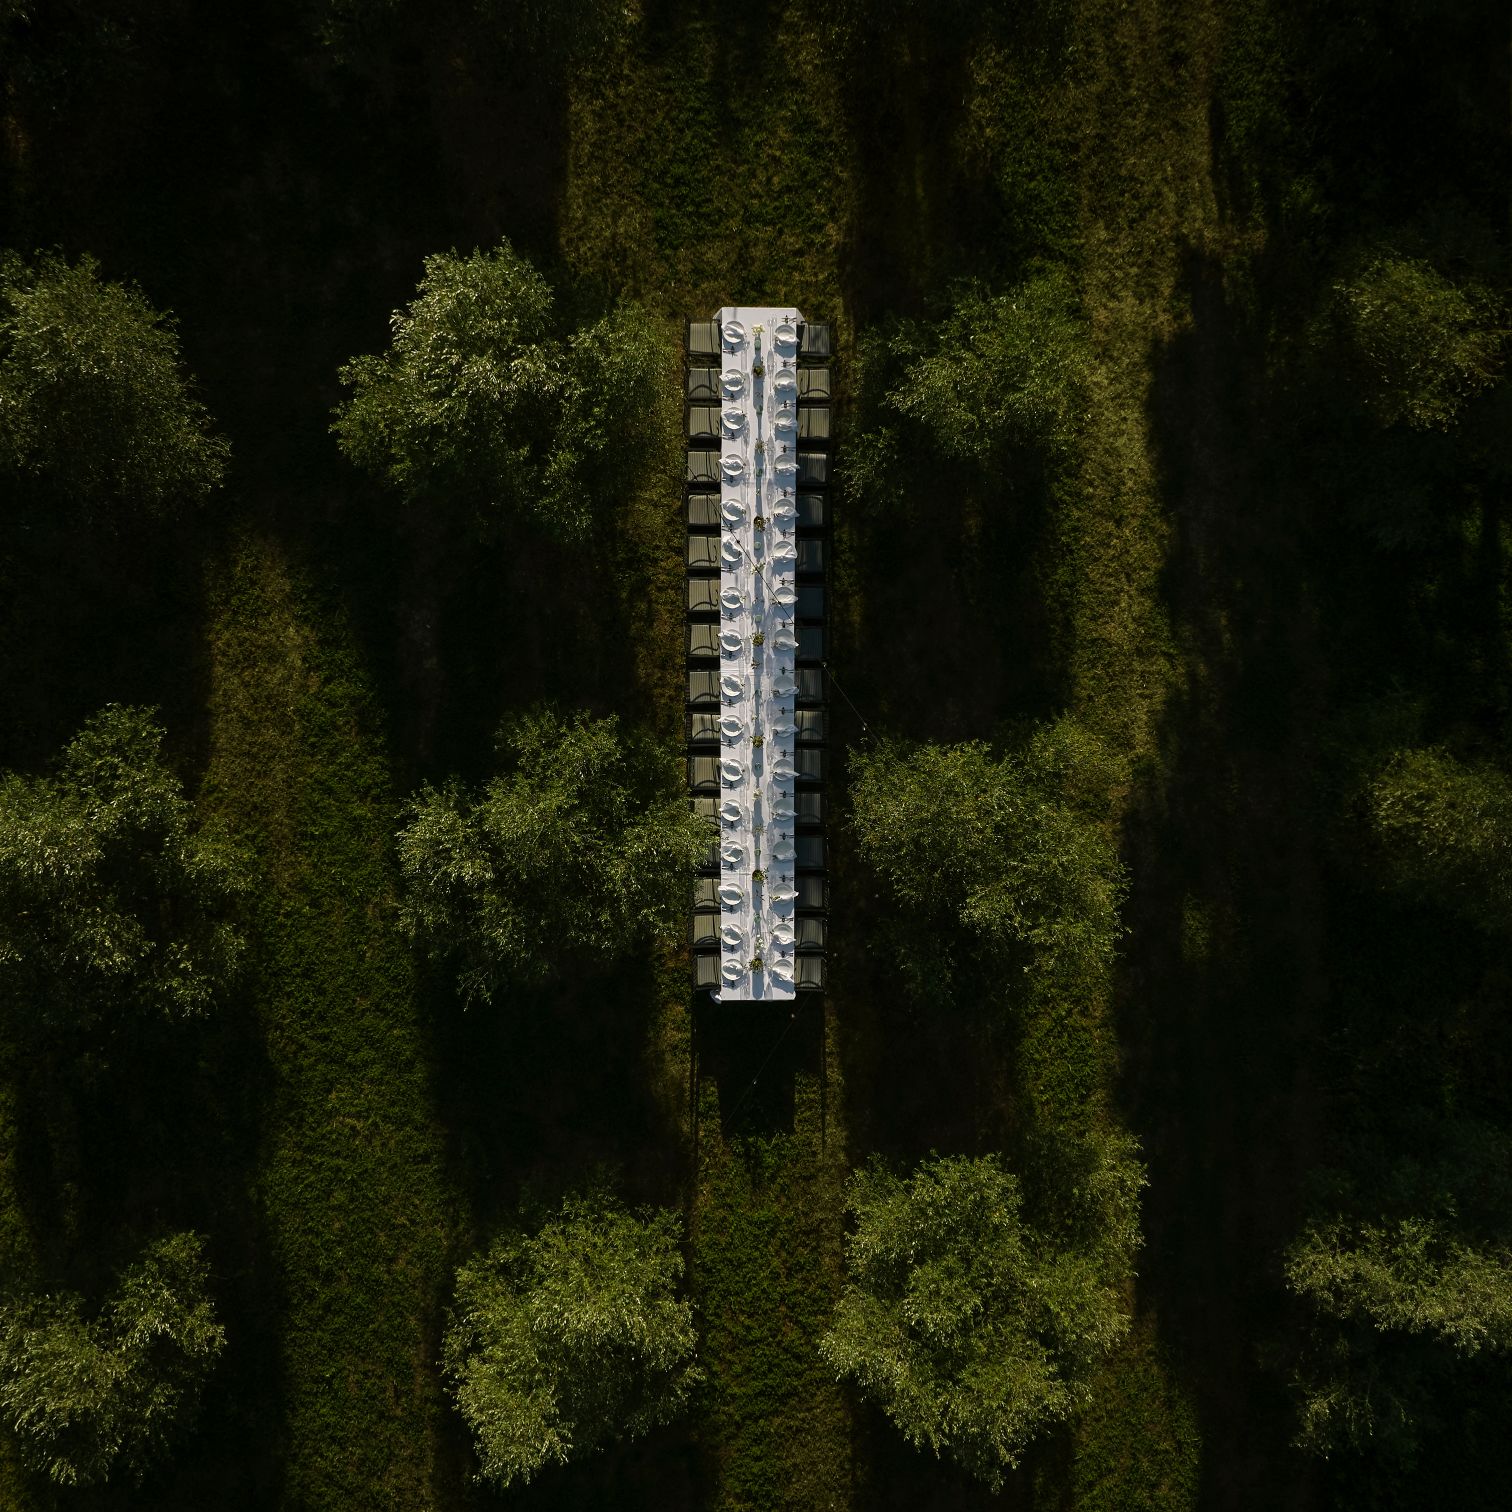 A Tall Tower Surrounded By Trees